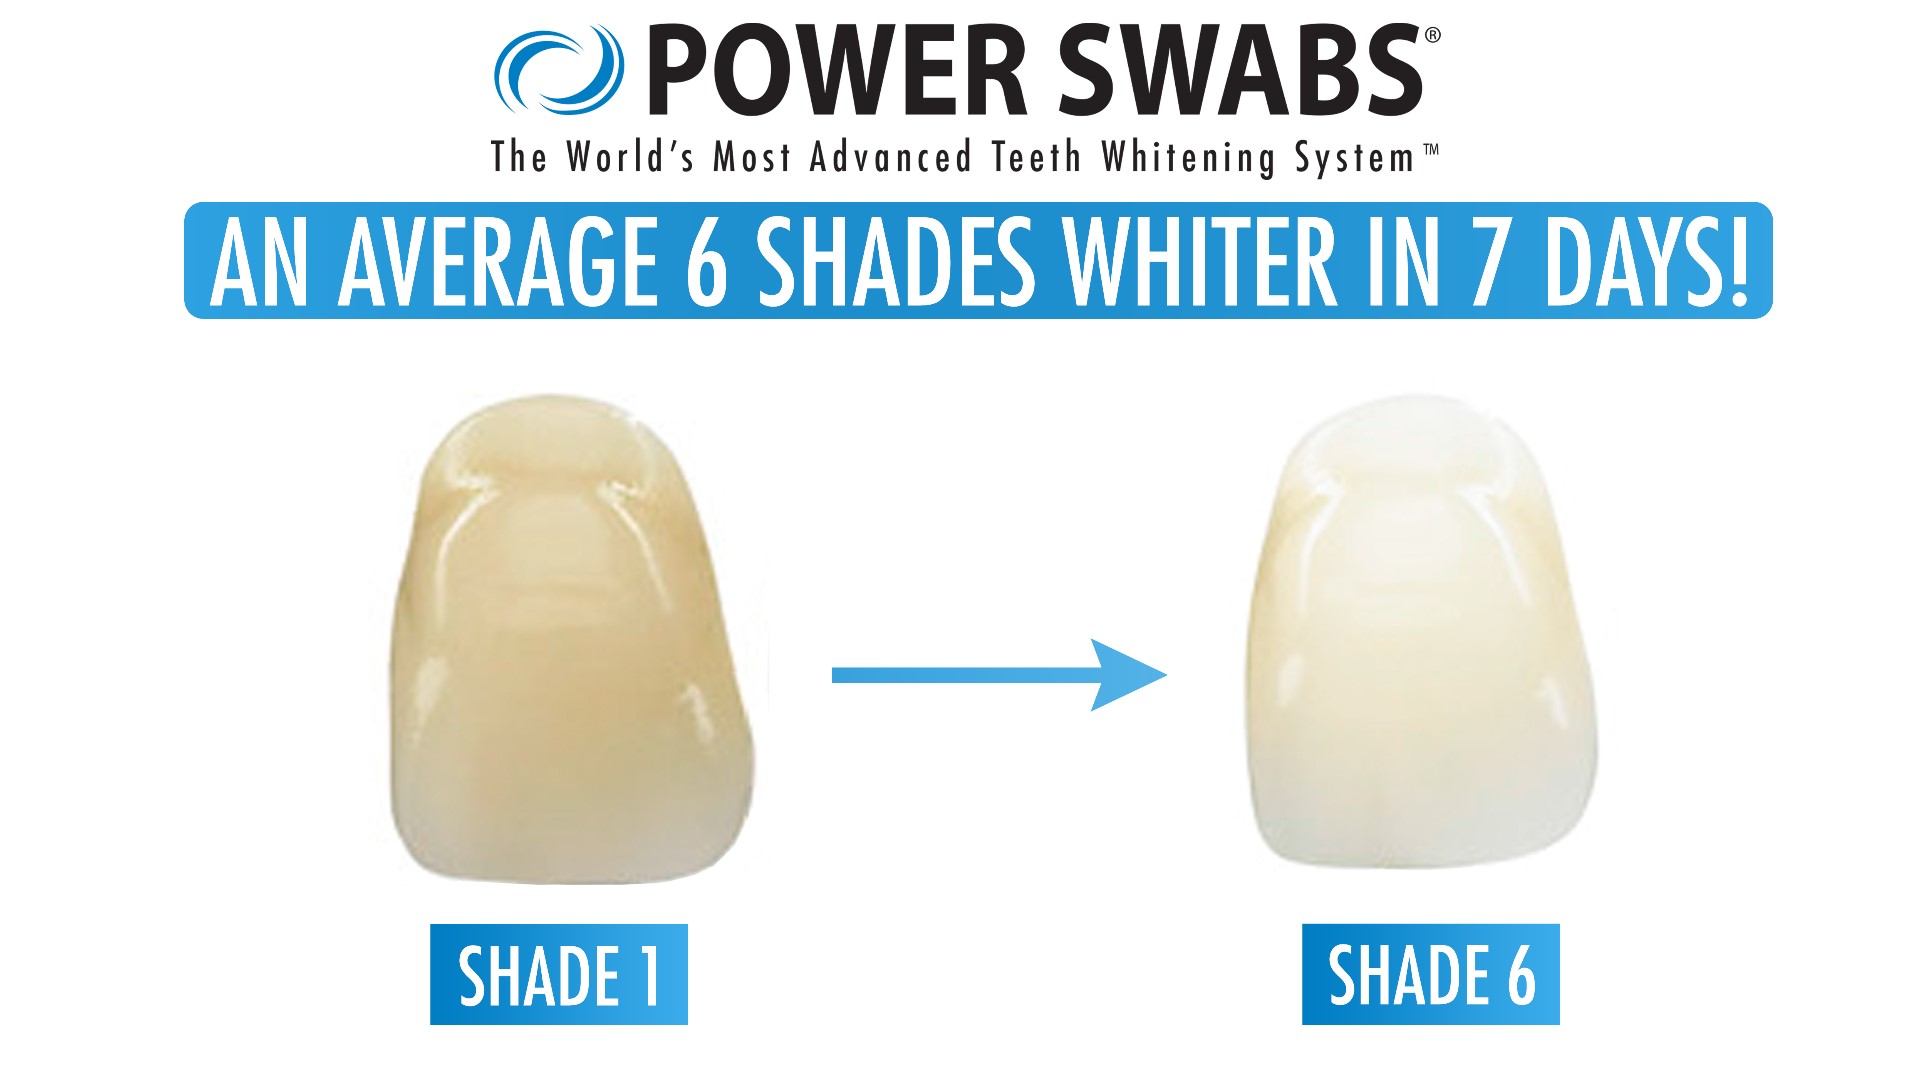 Get your smile in shape ahead of the holidays with Power Swabs.